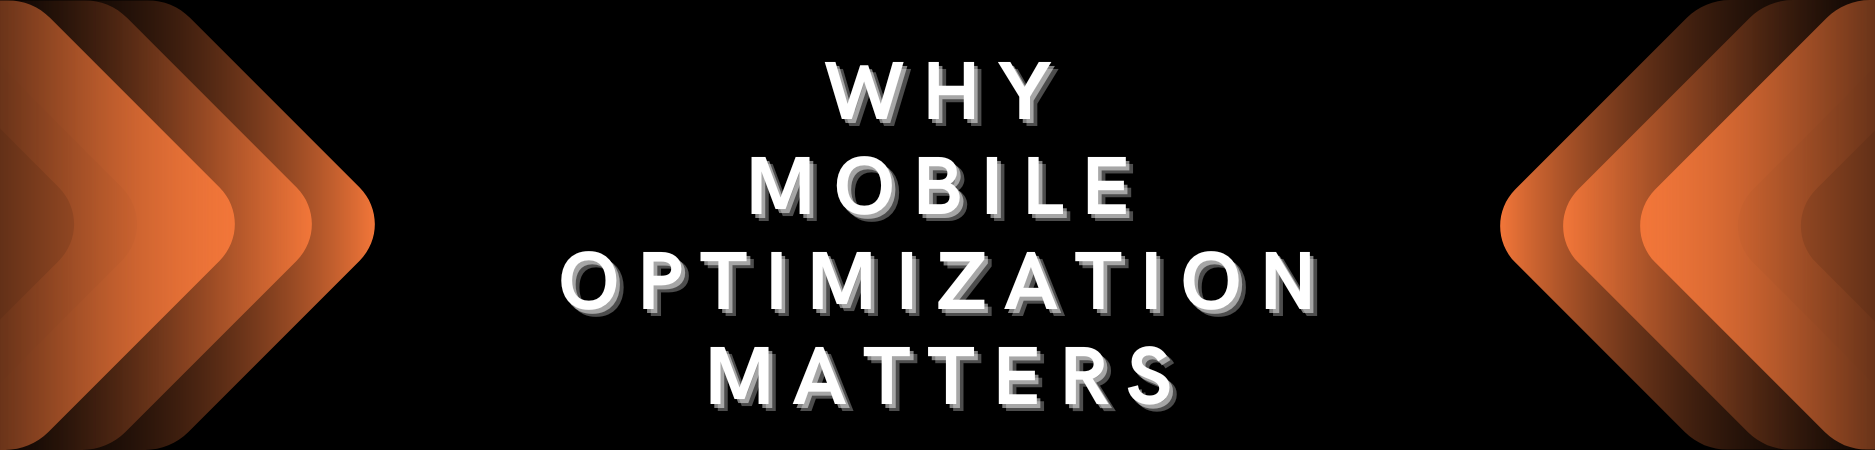 Why Mobile Optimization Matters